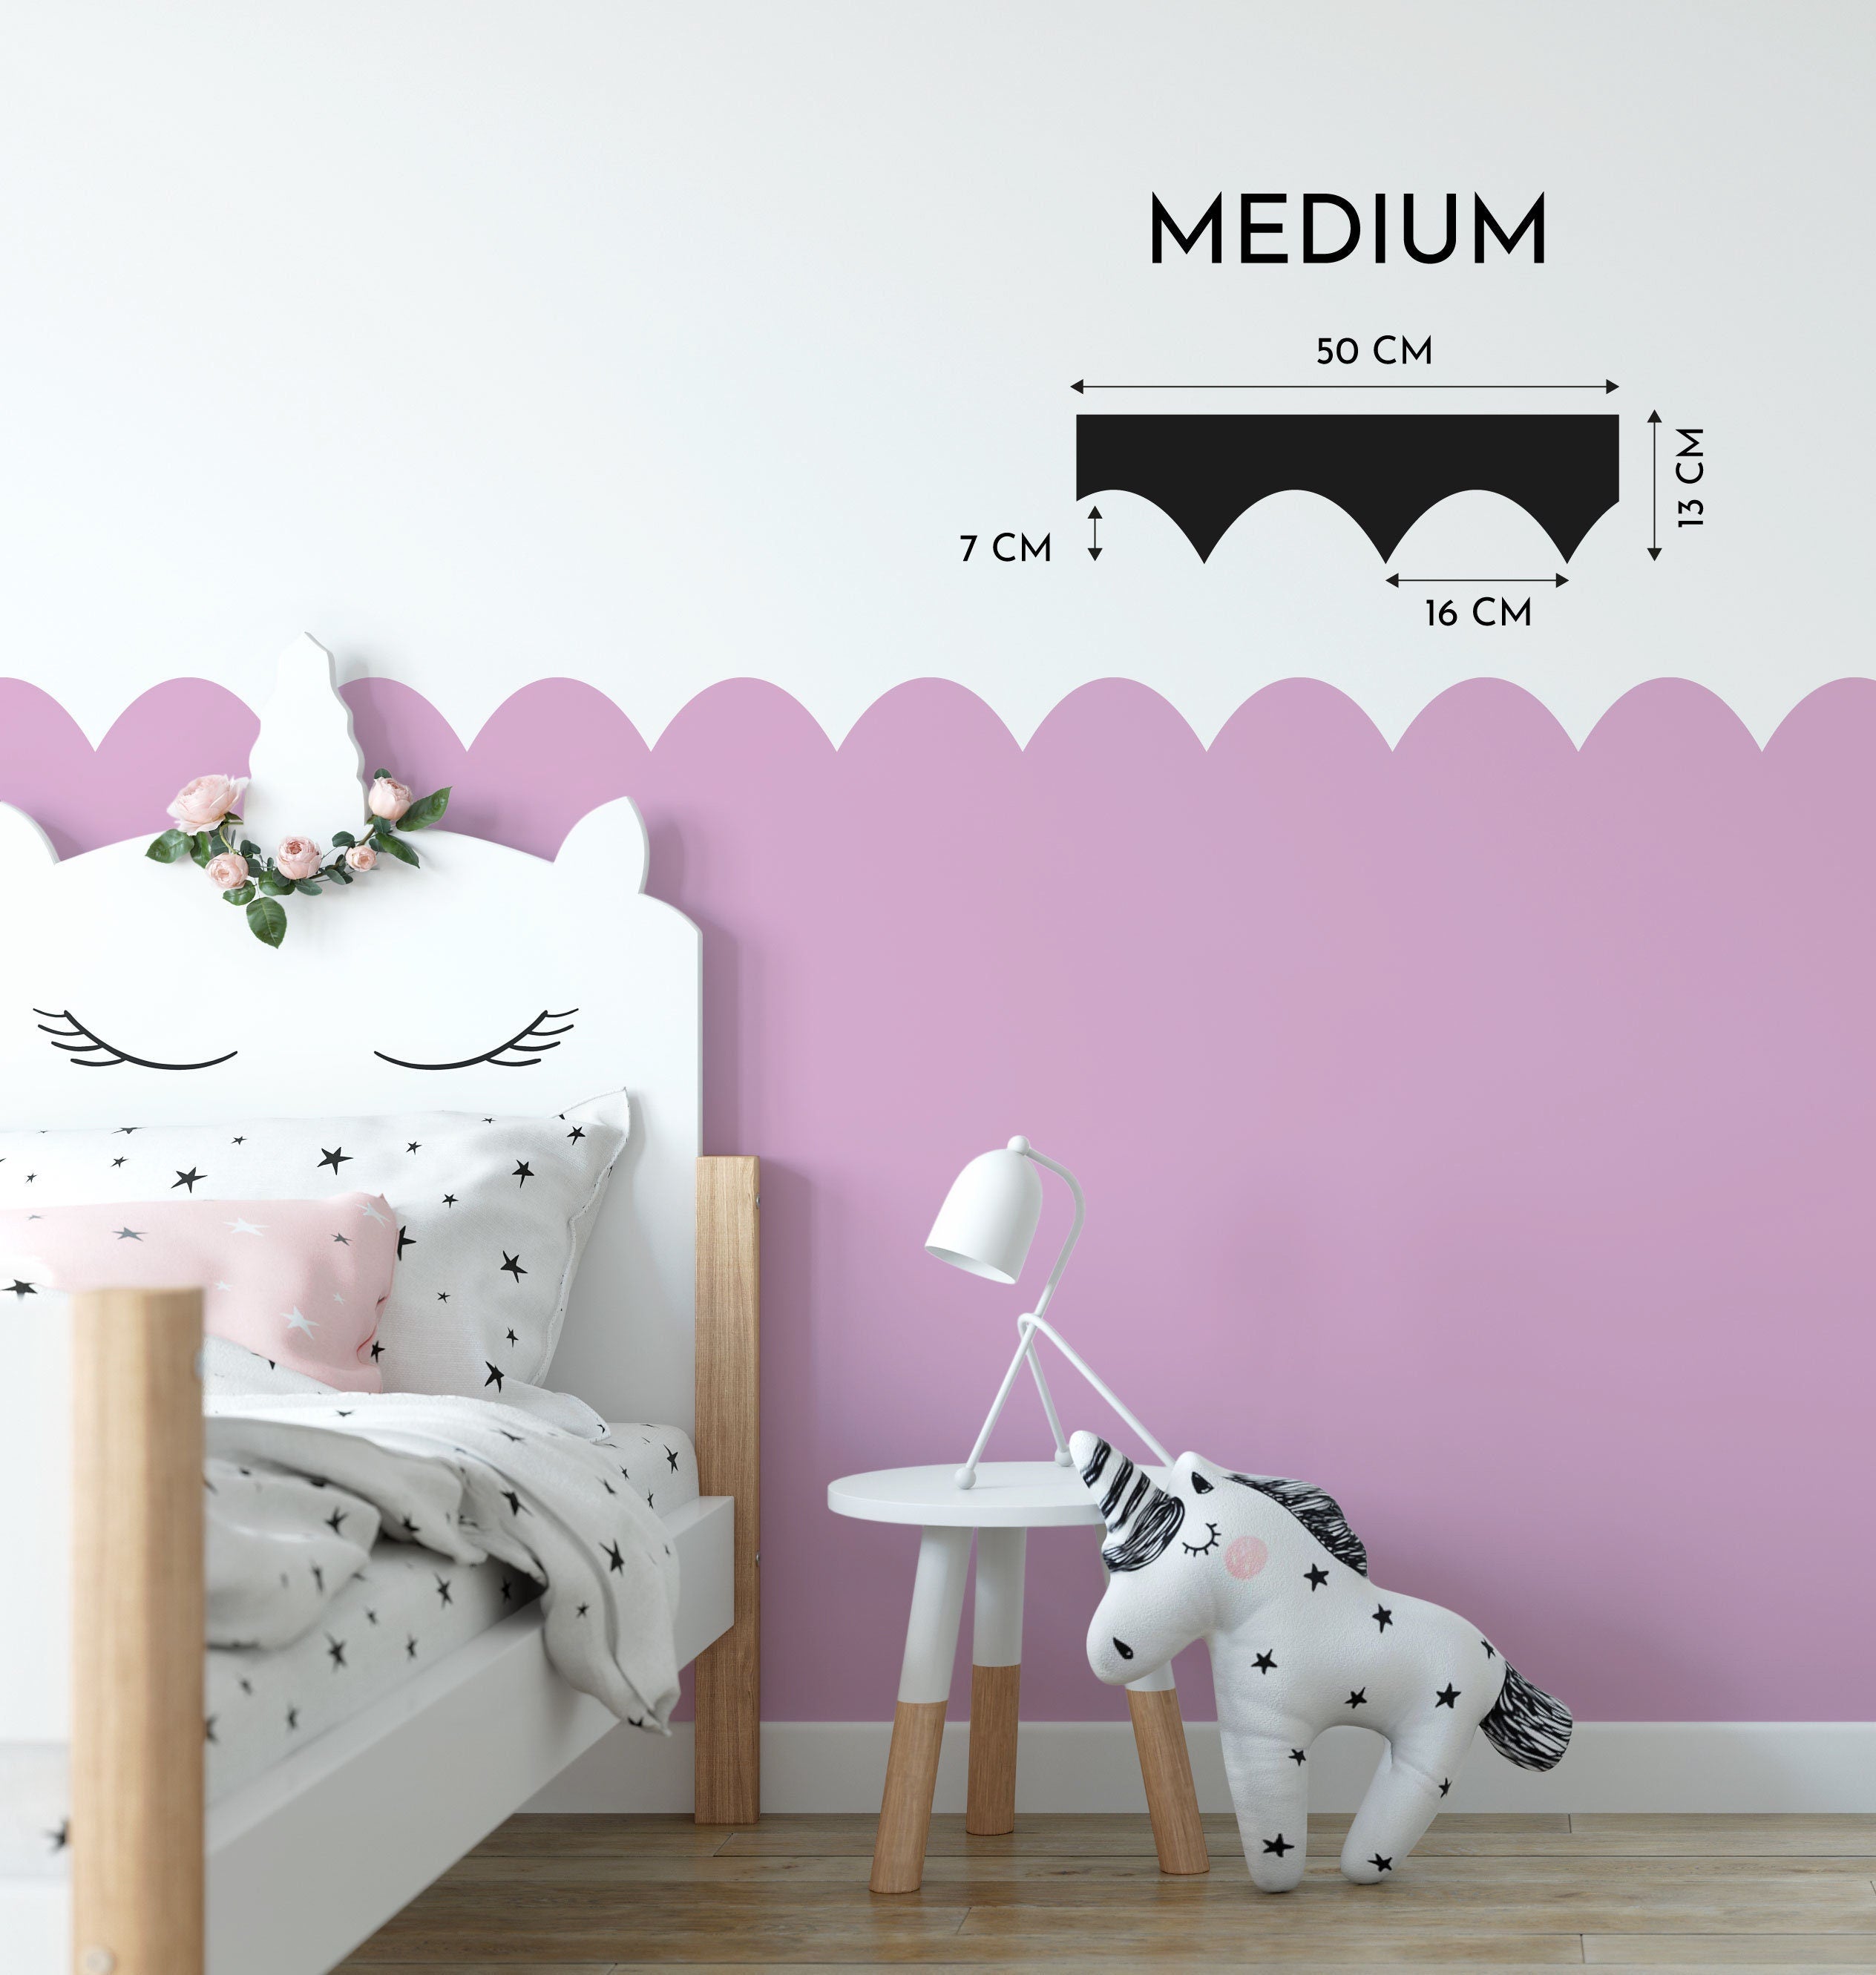 Rounded Wall Paint Stencil For Boarders Painting | Kids Rooms Boys & Girls Nursery Room Boarder